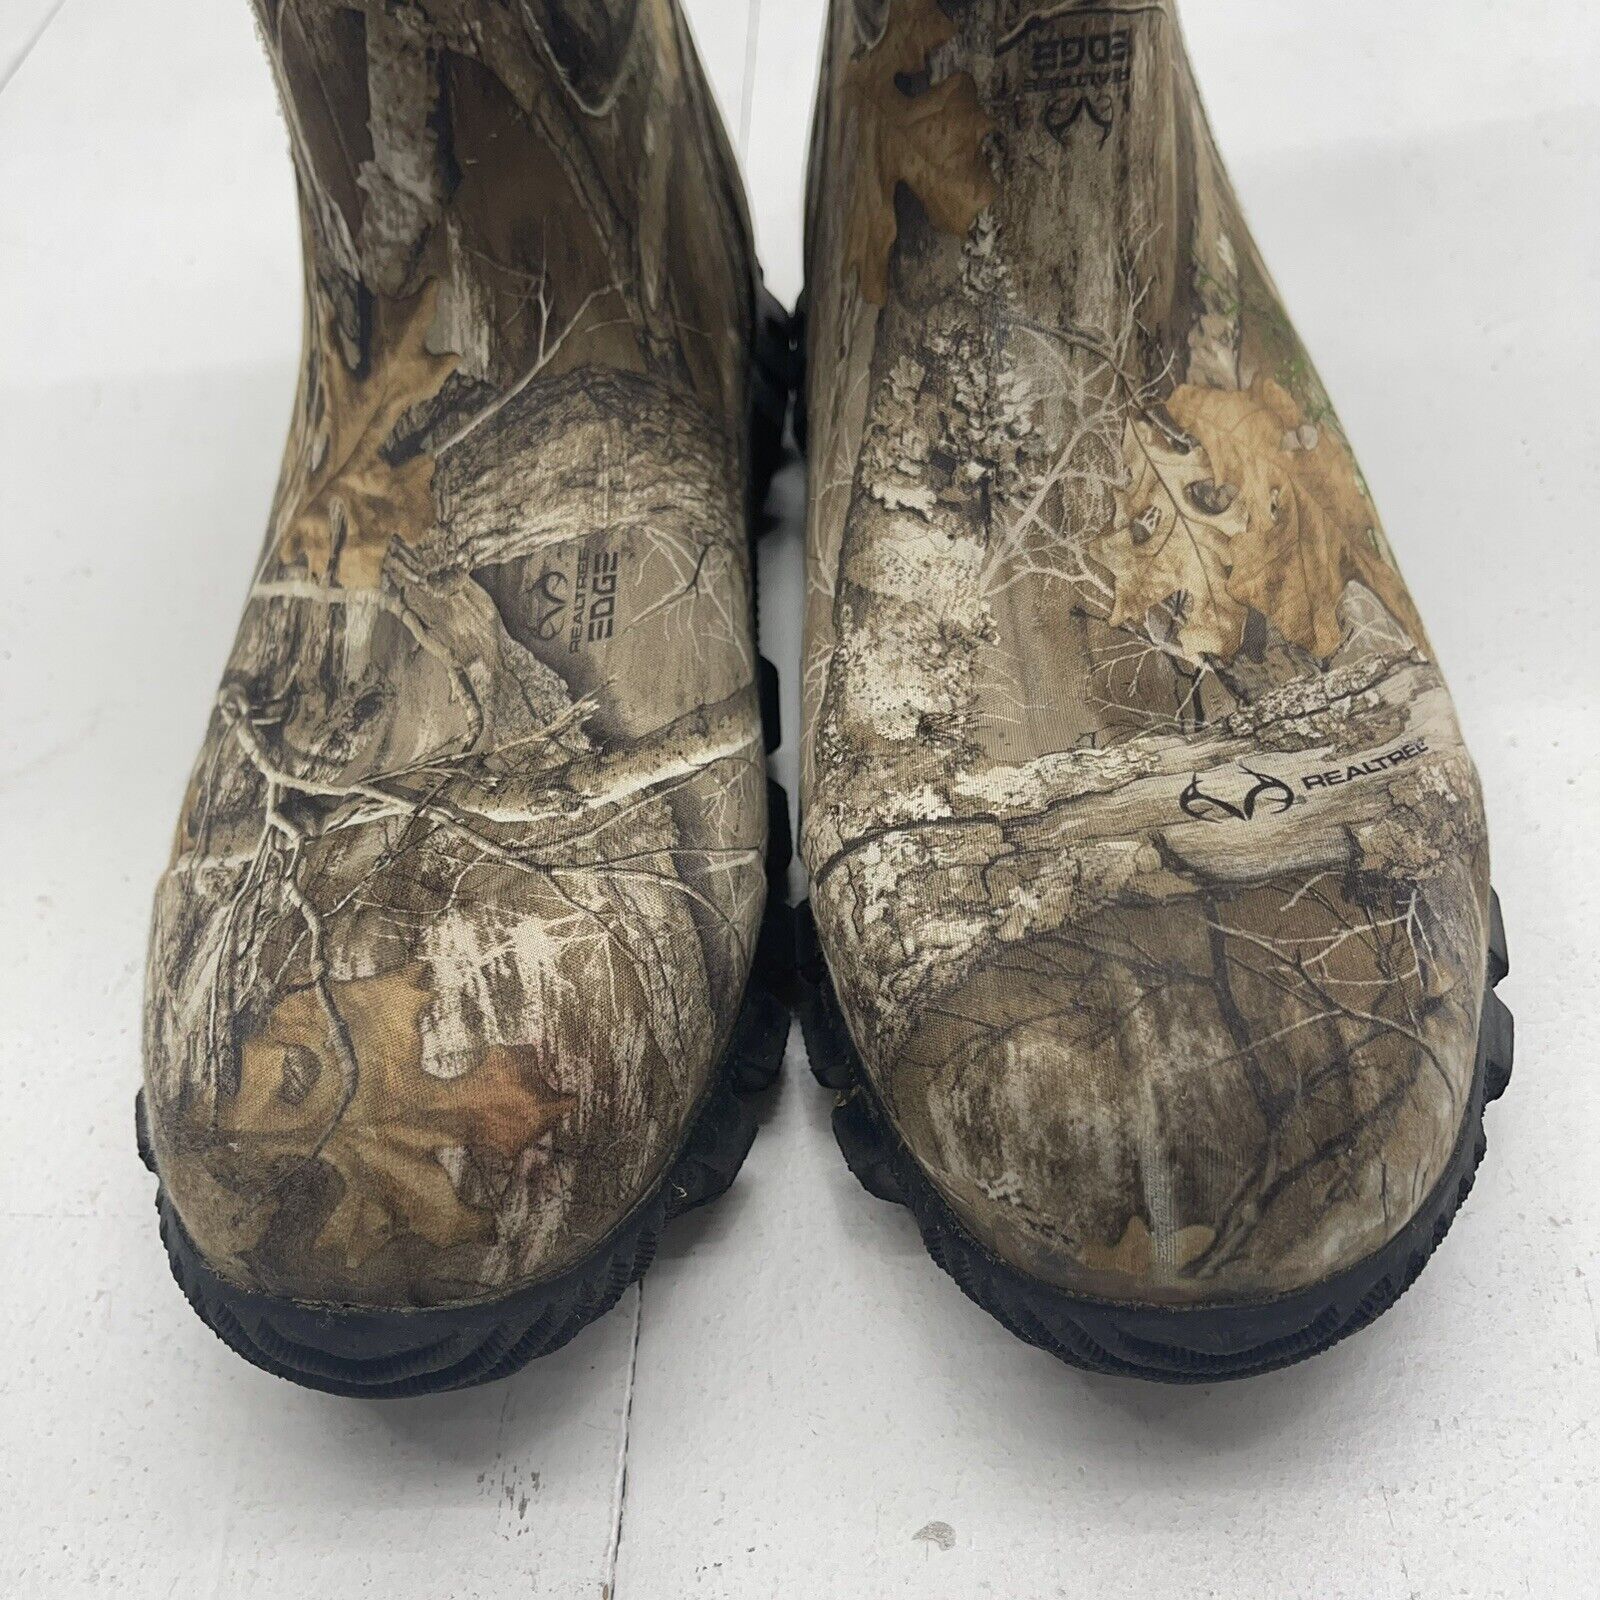 Magellan Outdoors Offers Fall 2020 Hunting Realtree Camo Boots